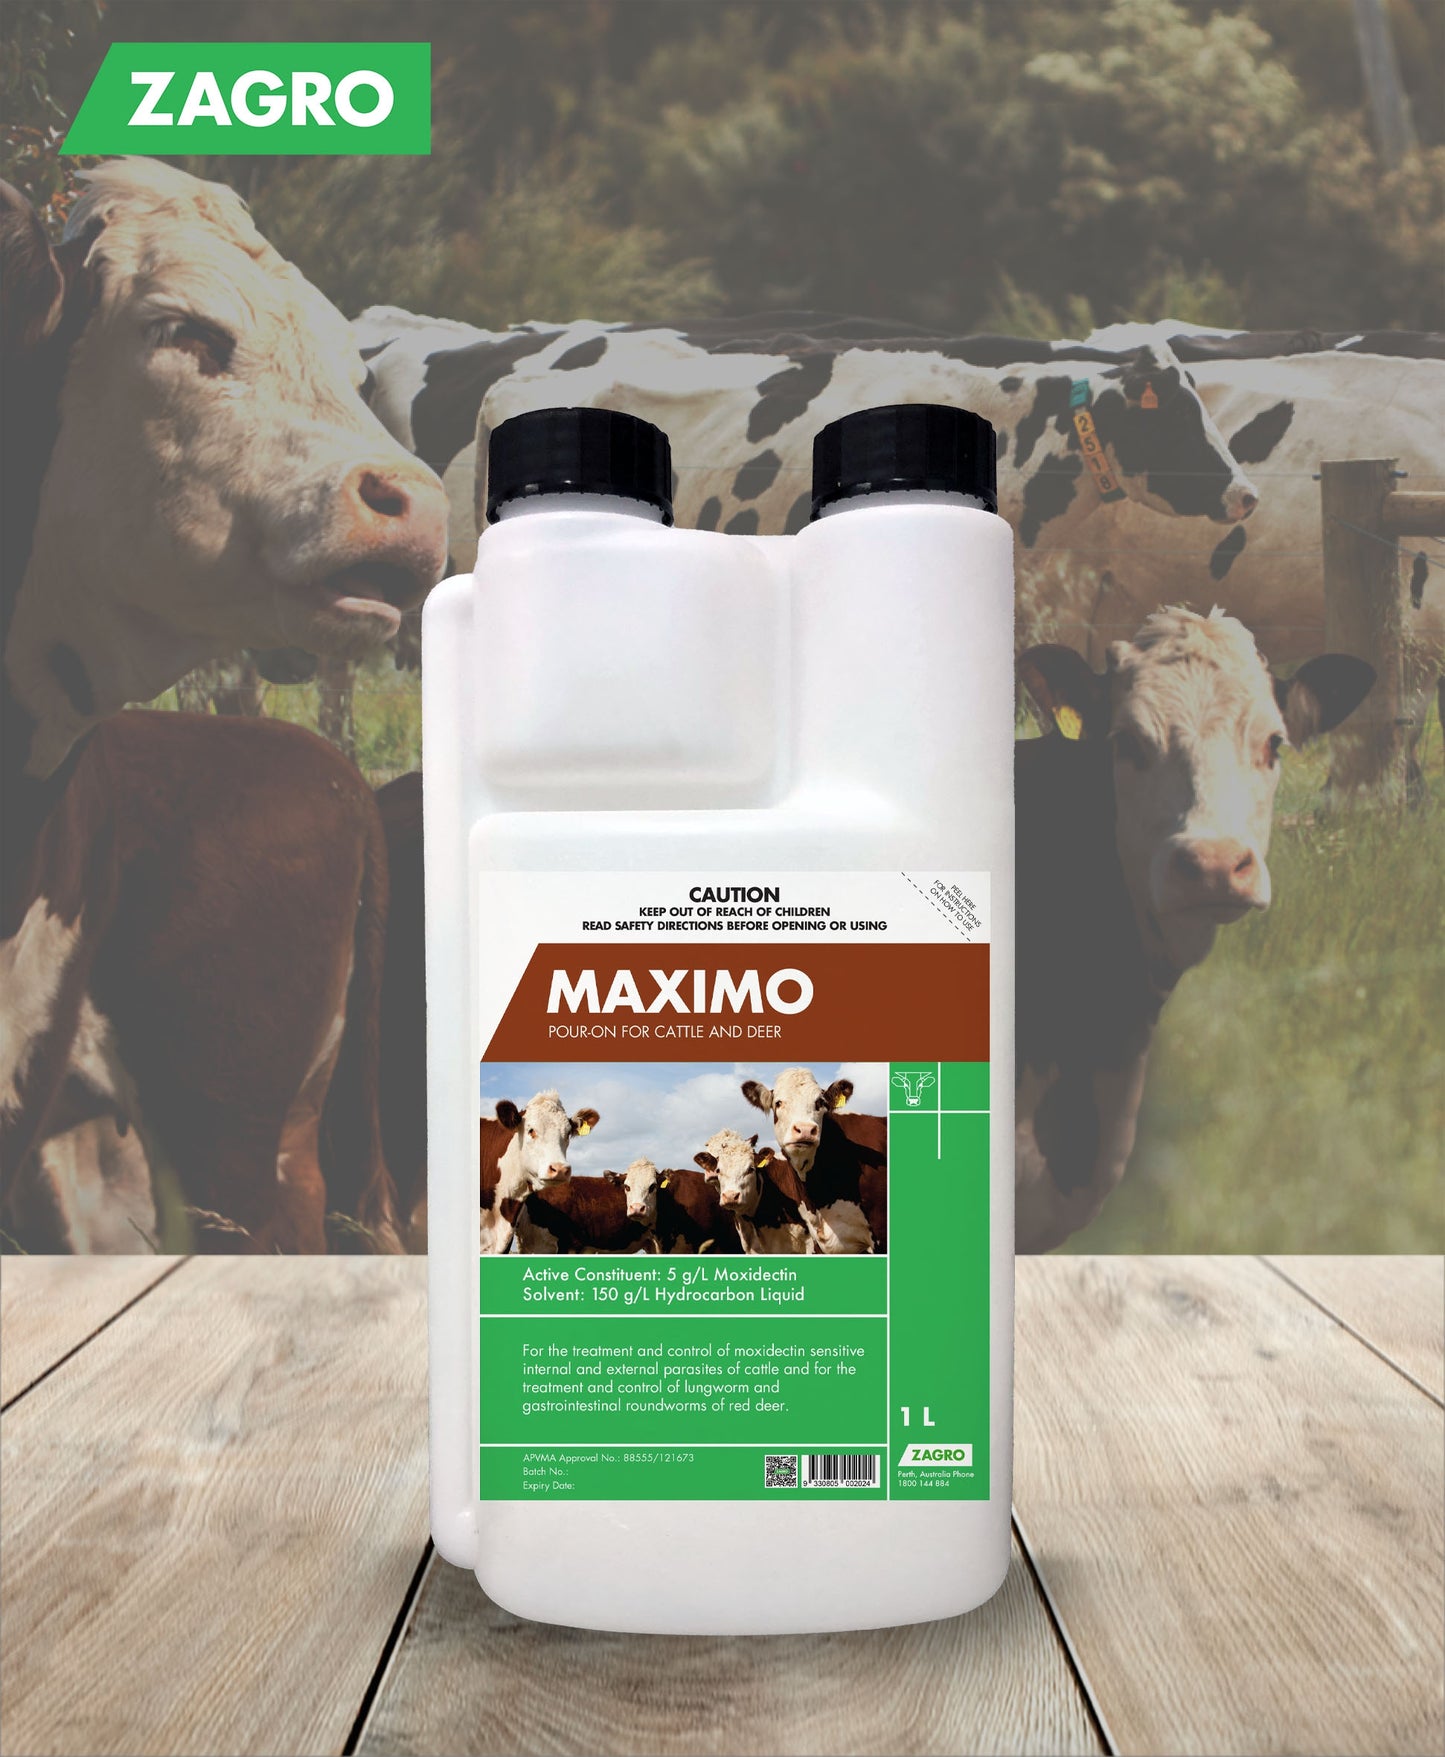 Maximo Pour-on for cattle